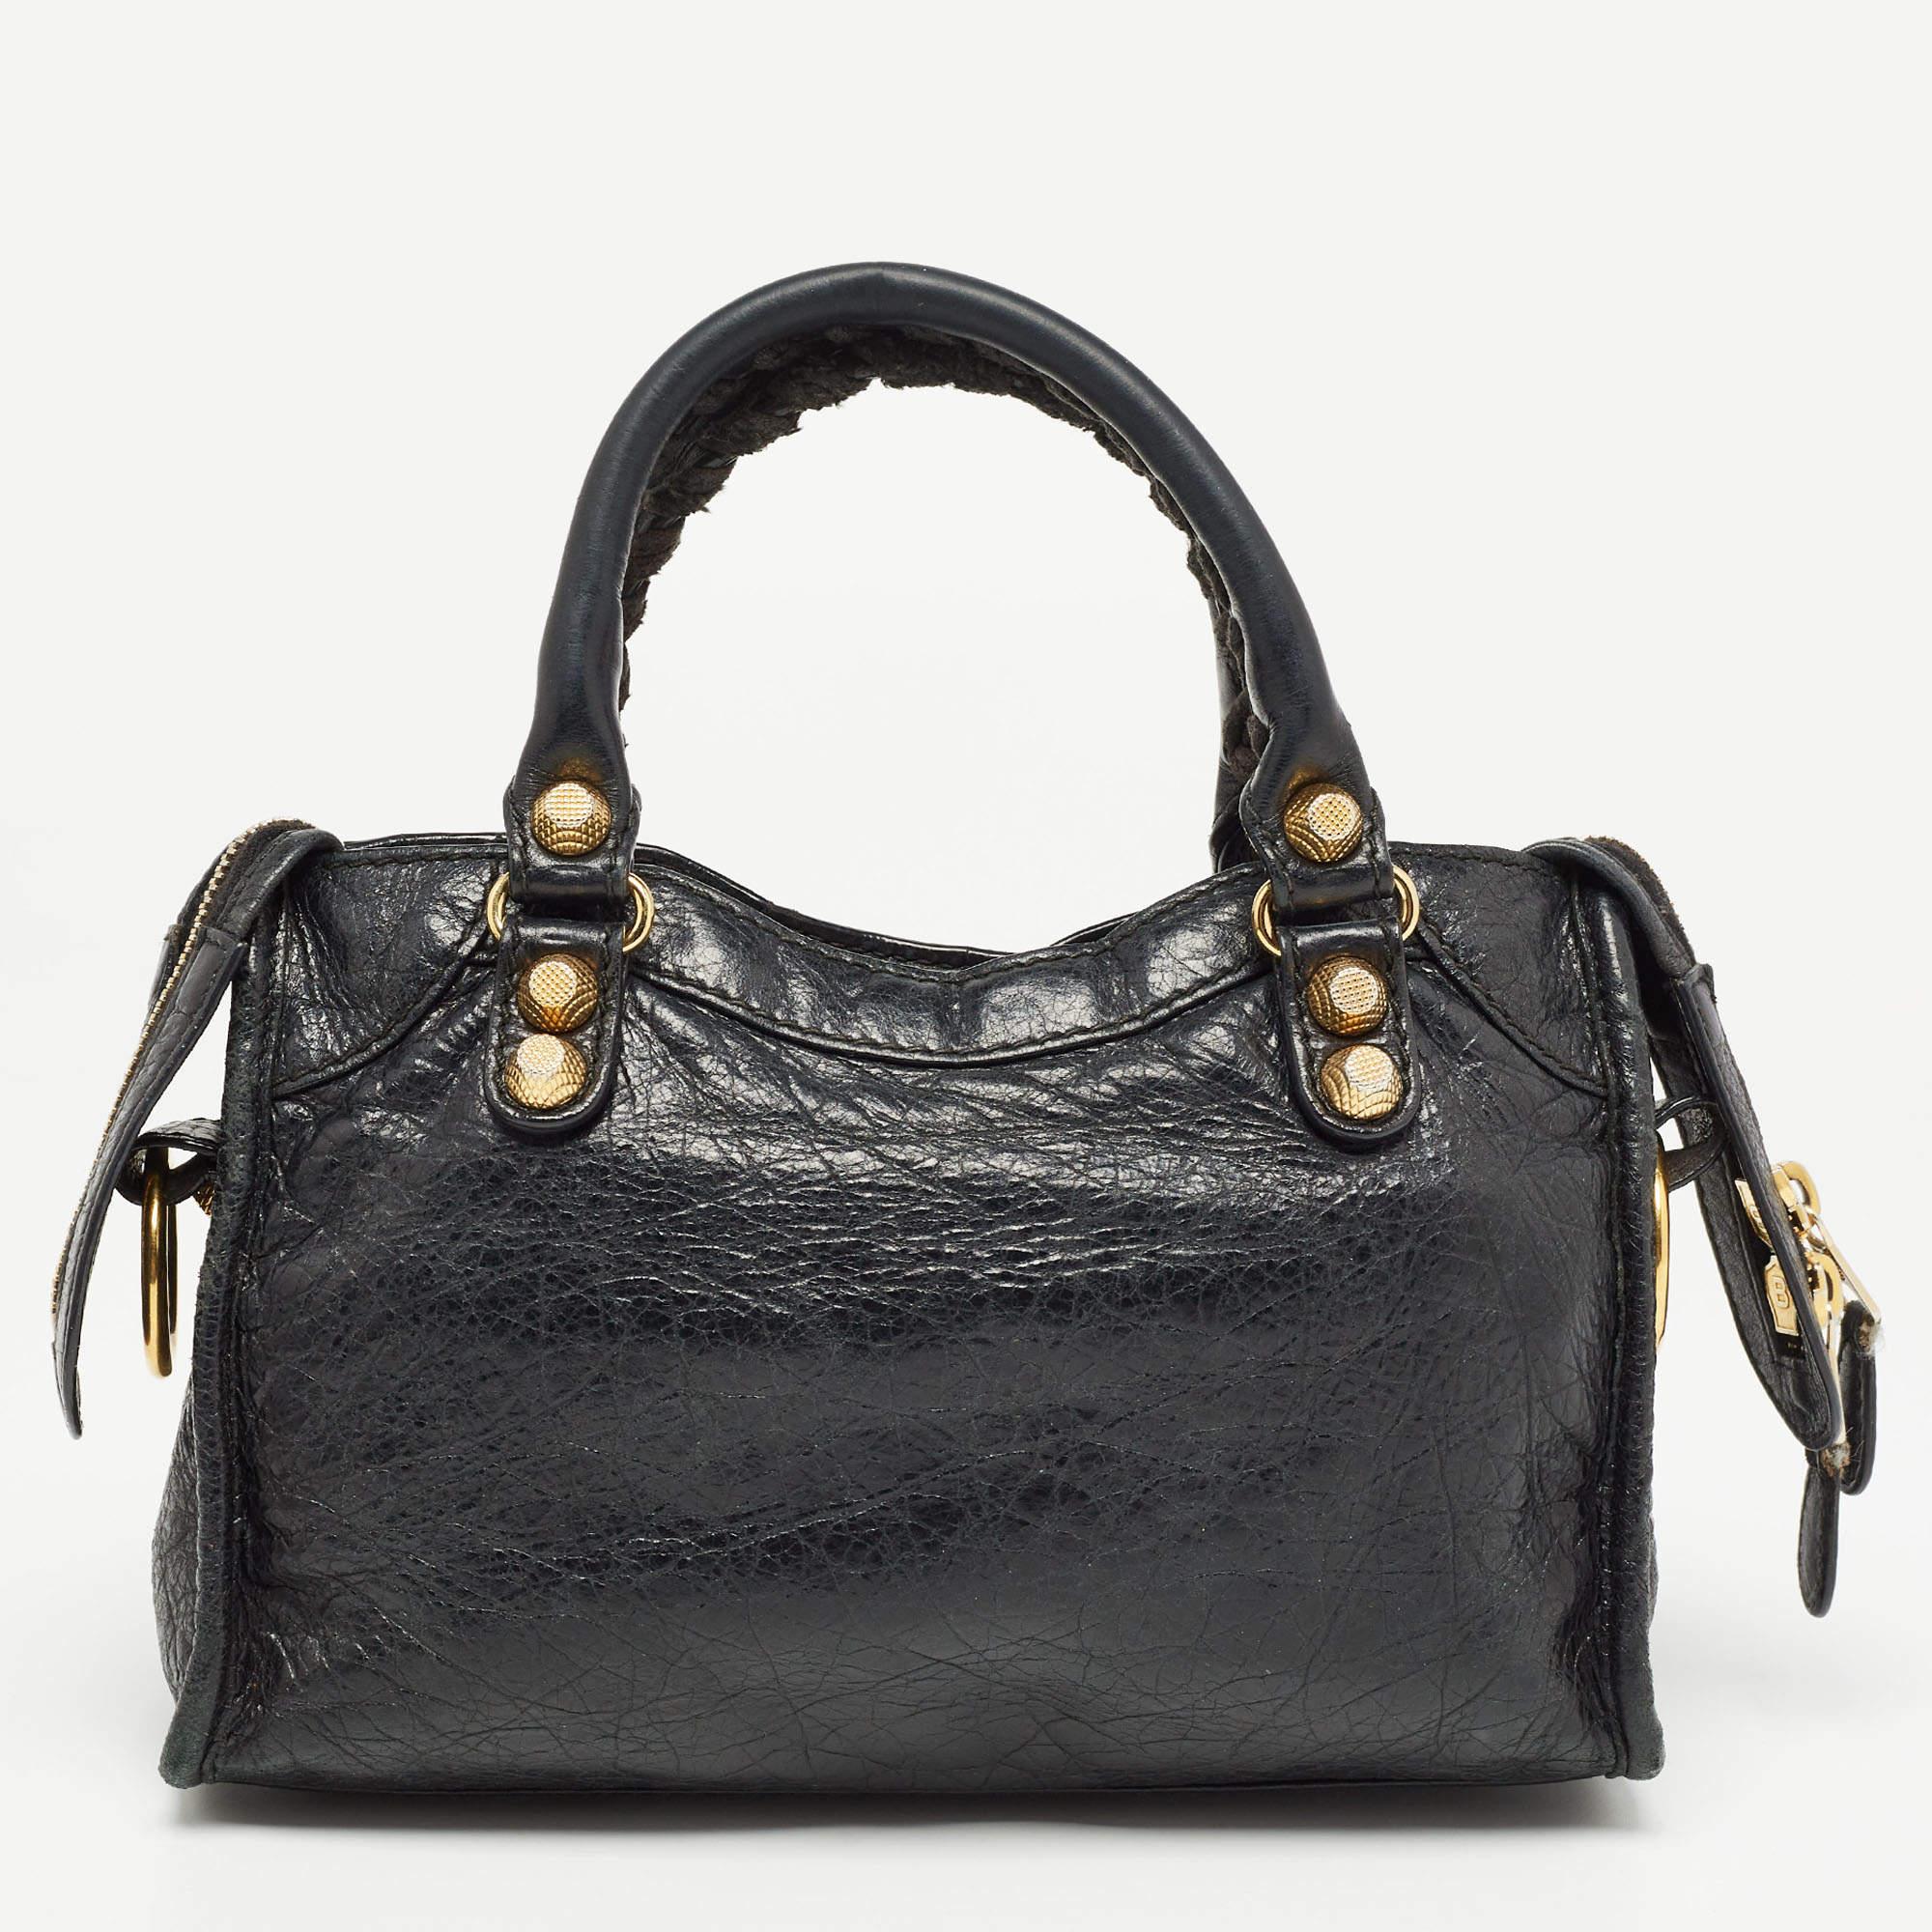 A classic handbag comes with the promise of enduring appeal, boosting your style time and again. This Balenciaga bag is one such creation. It’s a fine purchase.

Includes: Detachable Strap, Mirror